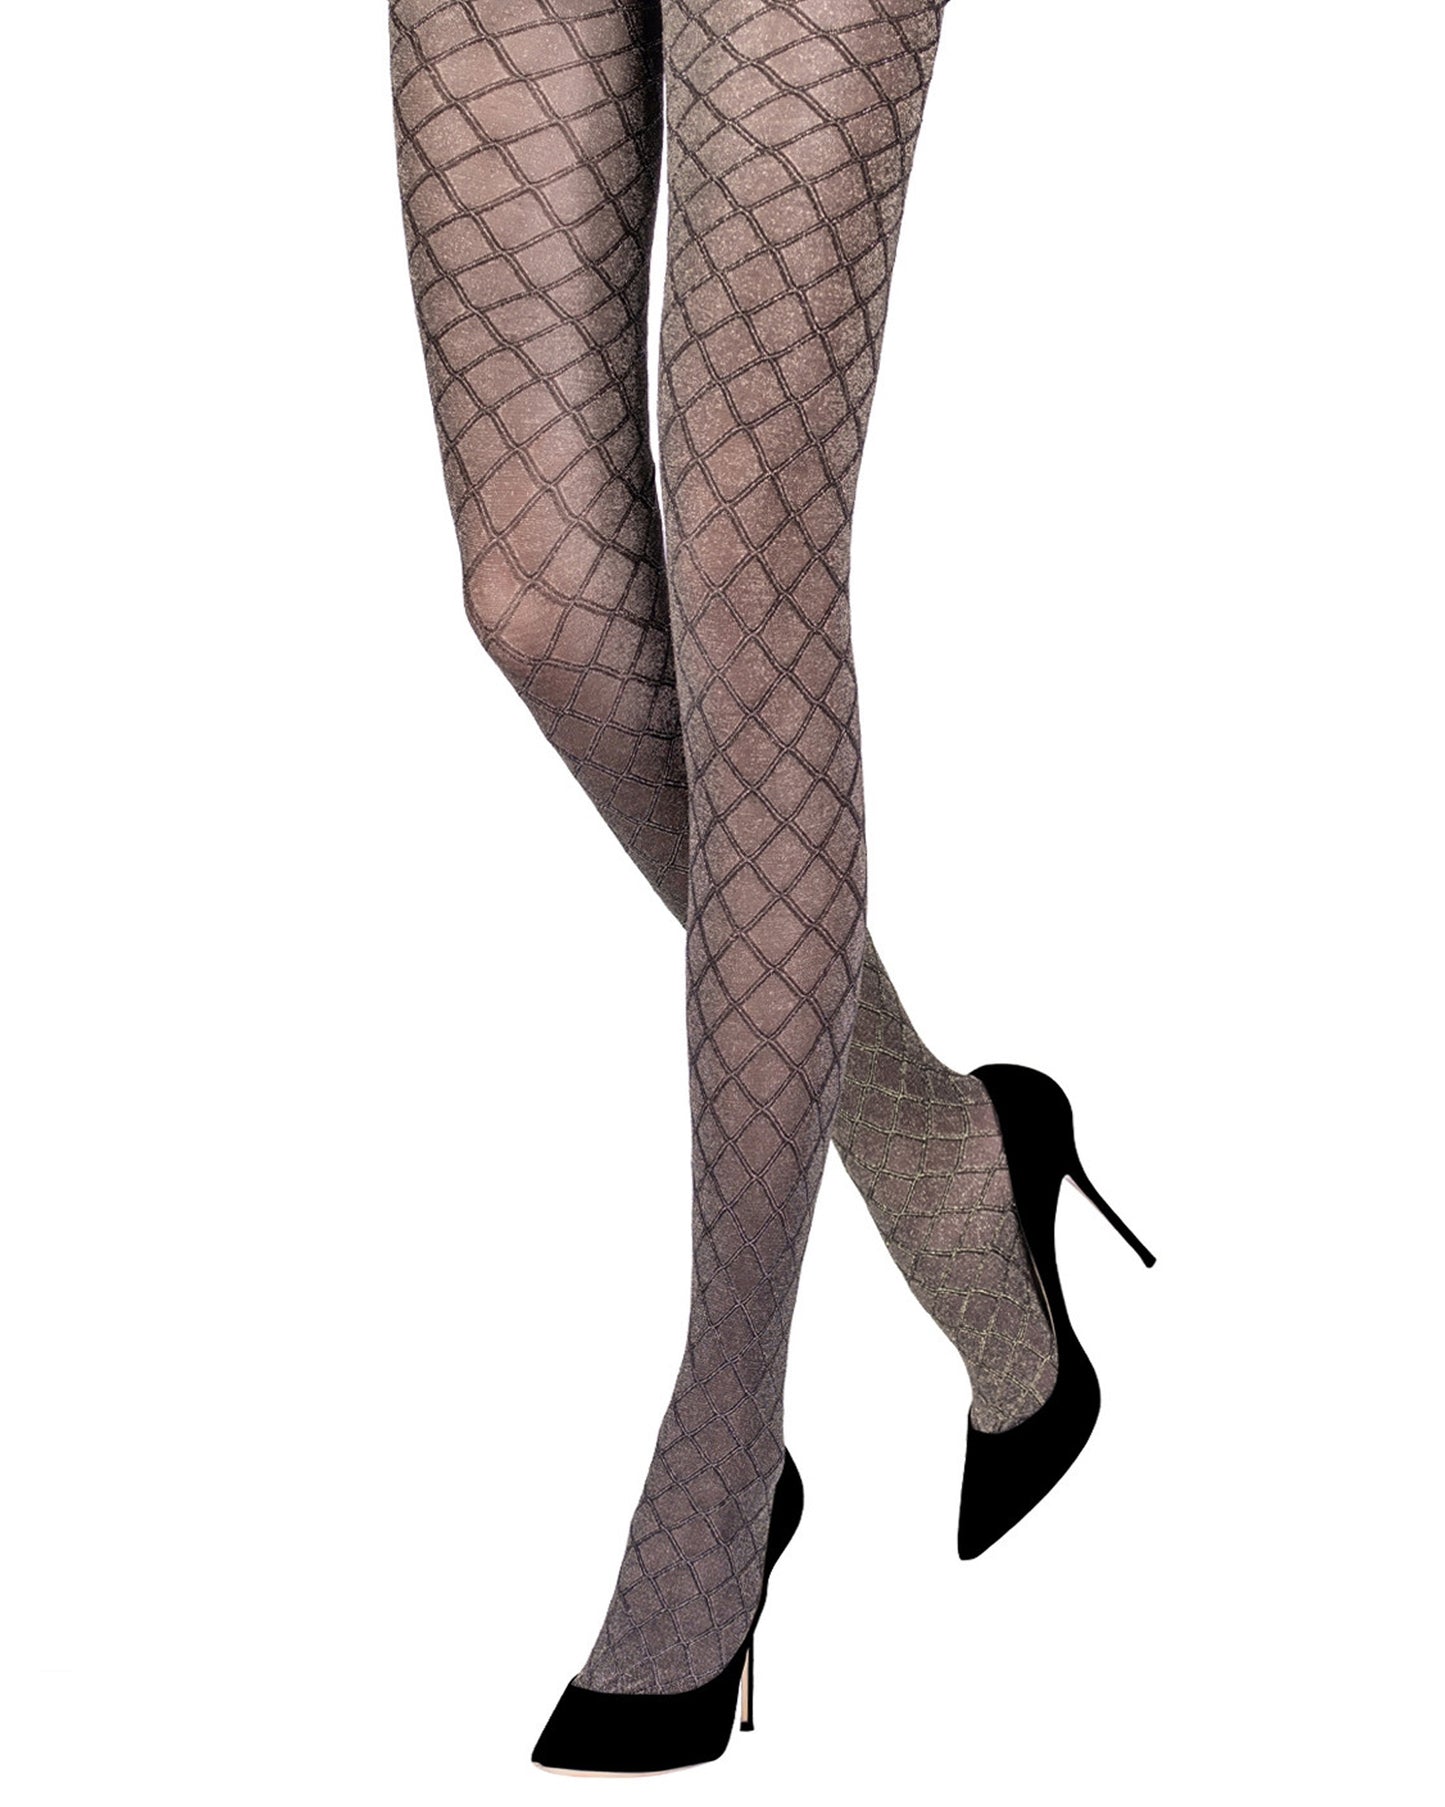 Emilio Cavallini Metallized Diamond Tights - Semi opaque black tights with an all over enclosed fishnet style textured pattern with sparkly gold lamé throughout, perfect for party season.